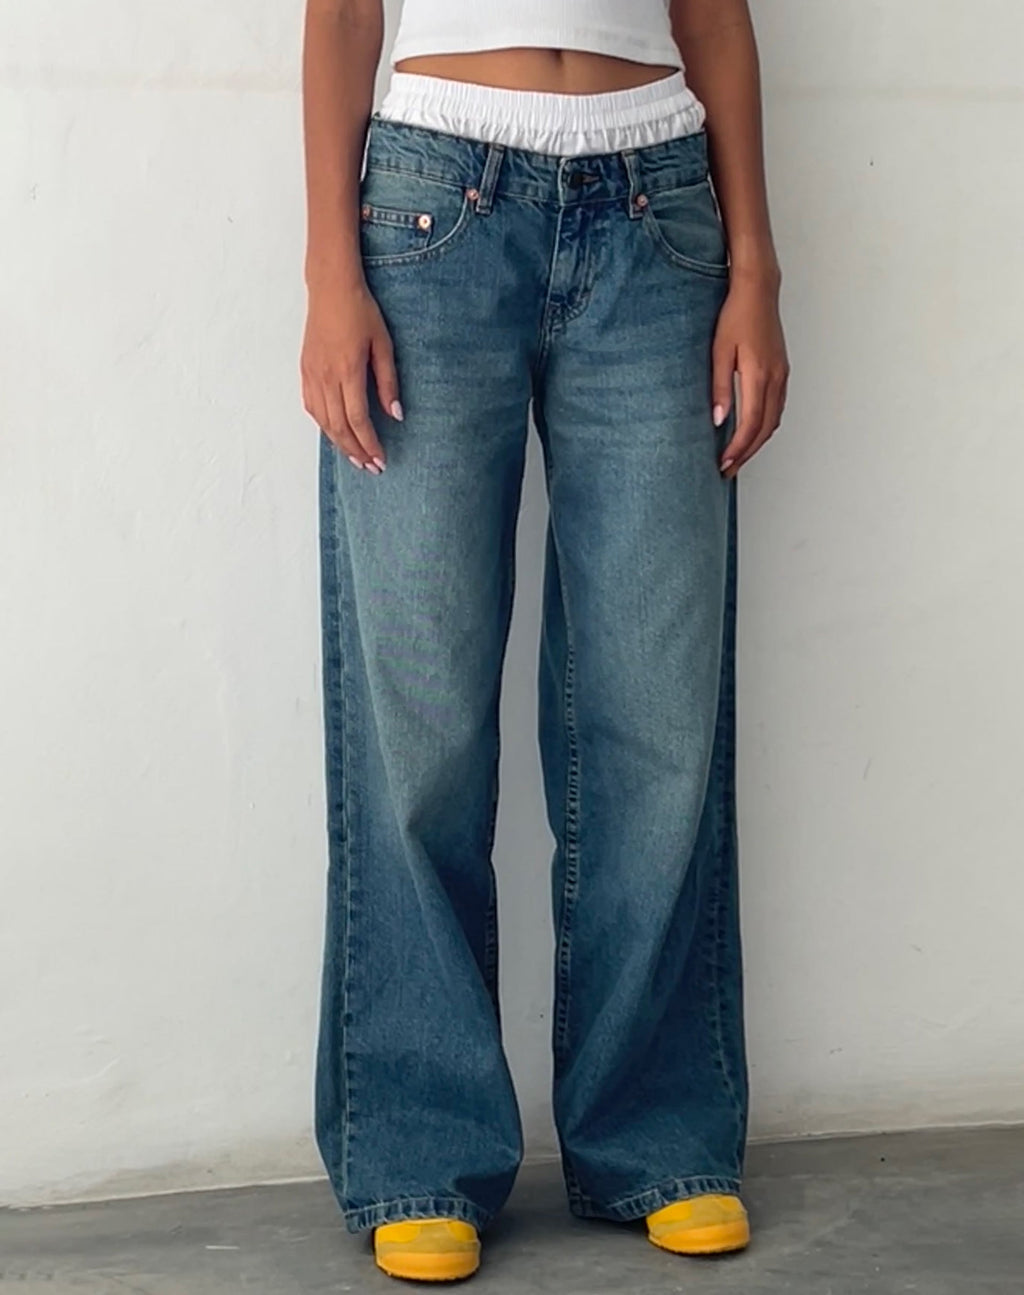 Roomy Extra Wide Low Rise Jeans in Indigo